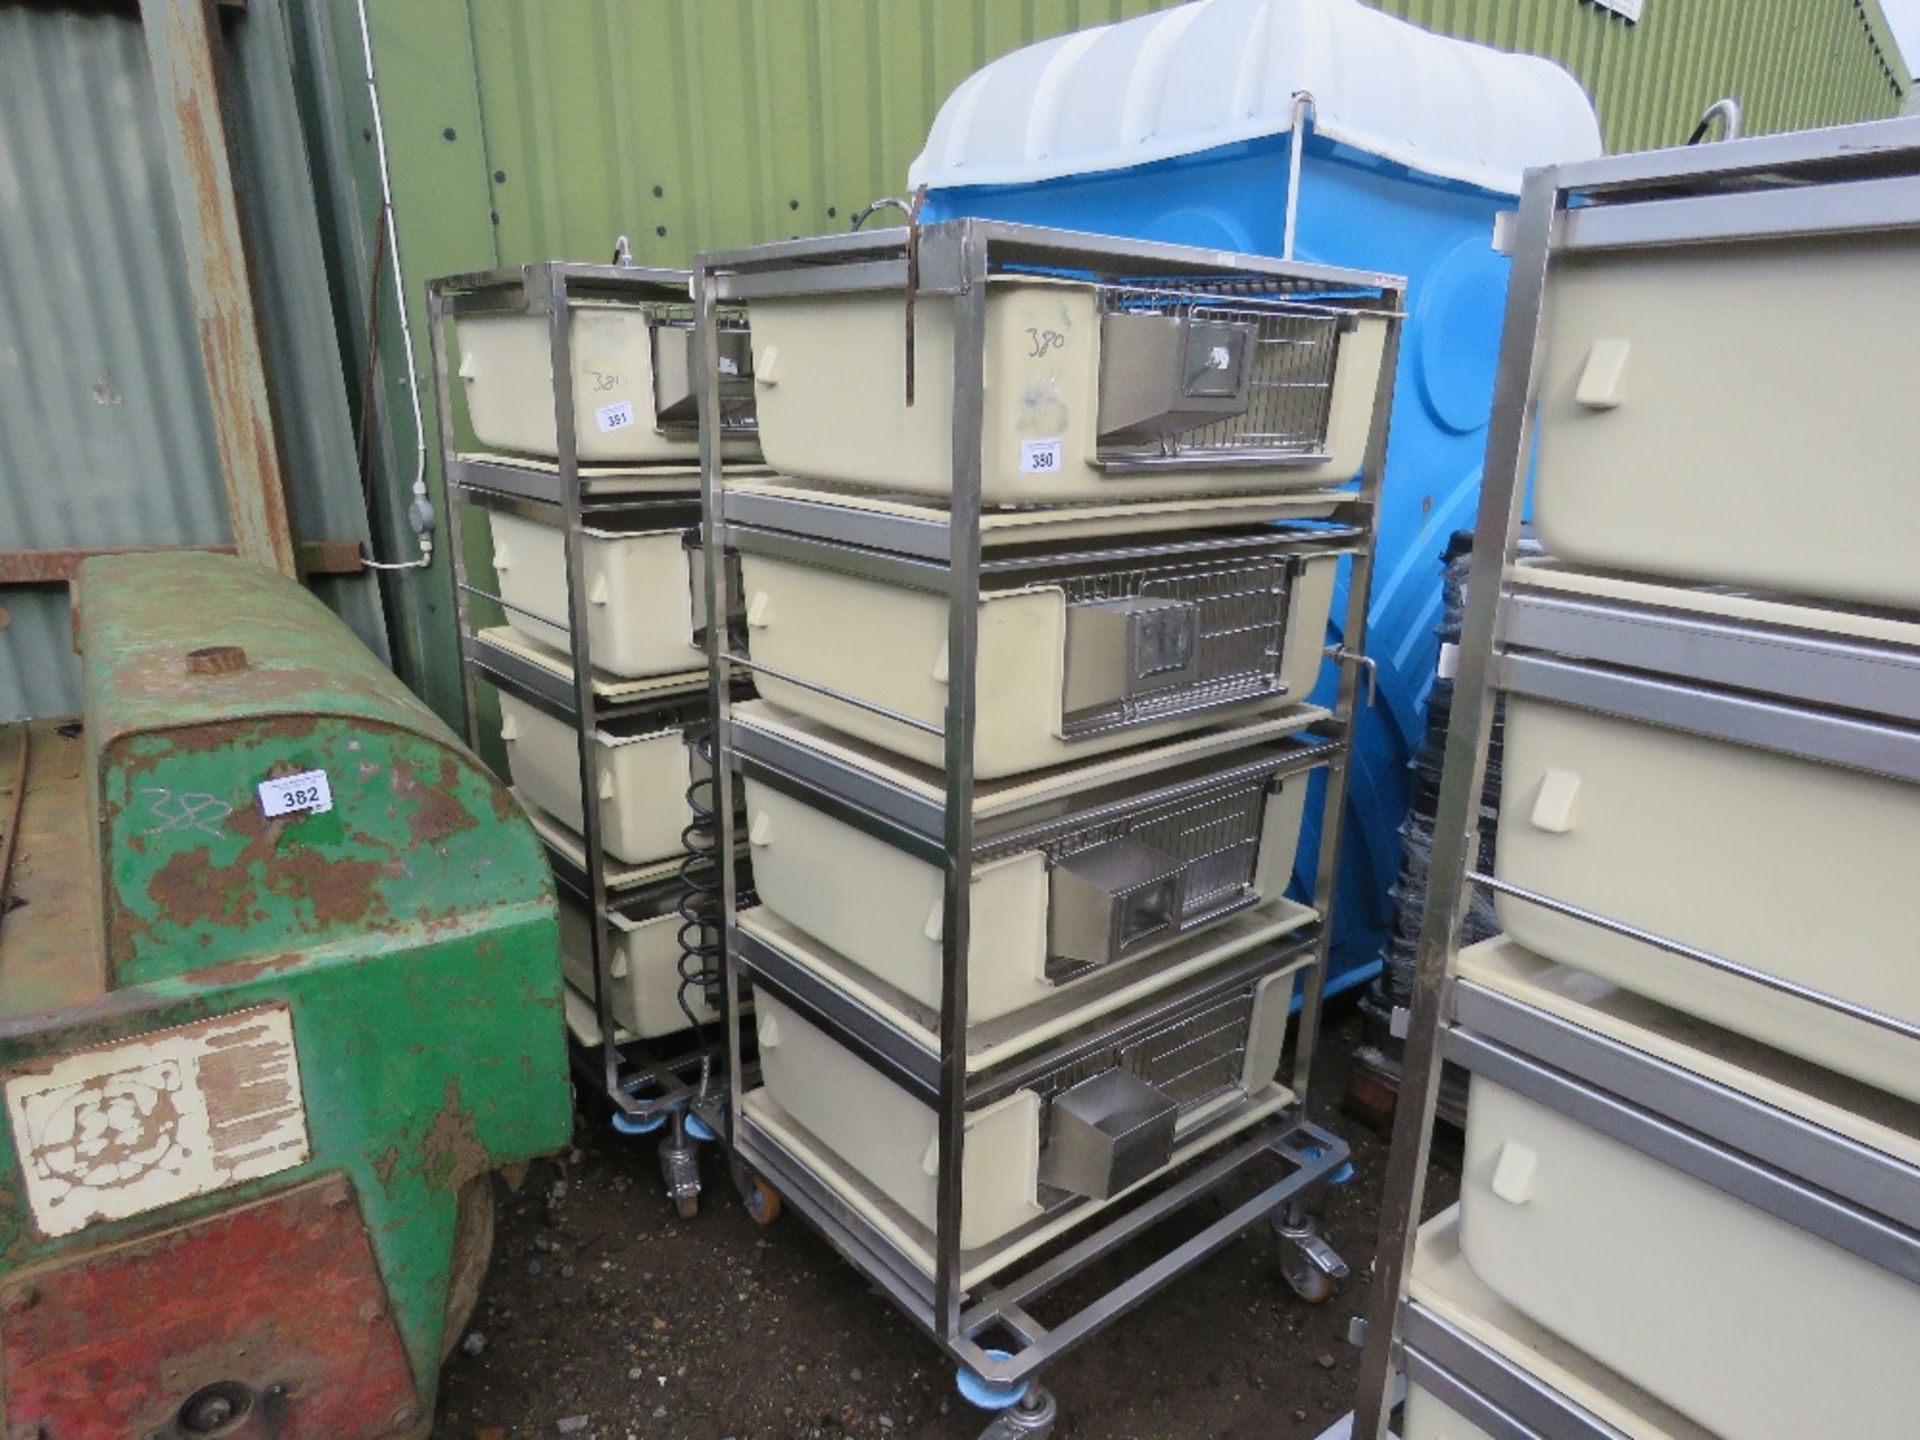 TECNIPLAST WHEELED STAINLESS STEEL TROLLEY FRAME CONTAINING 4 X VETINARY ANIMAL CAGES, LITTLE SIGNS